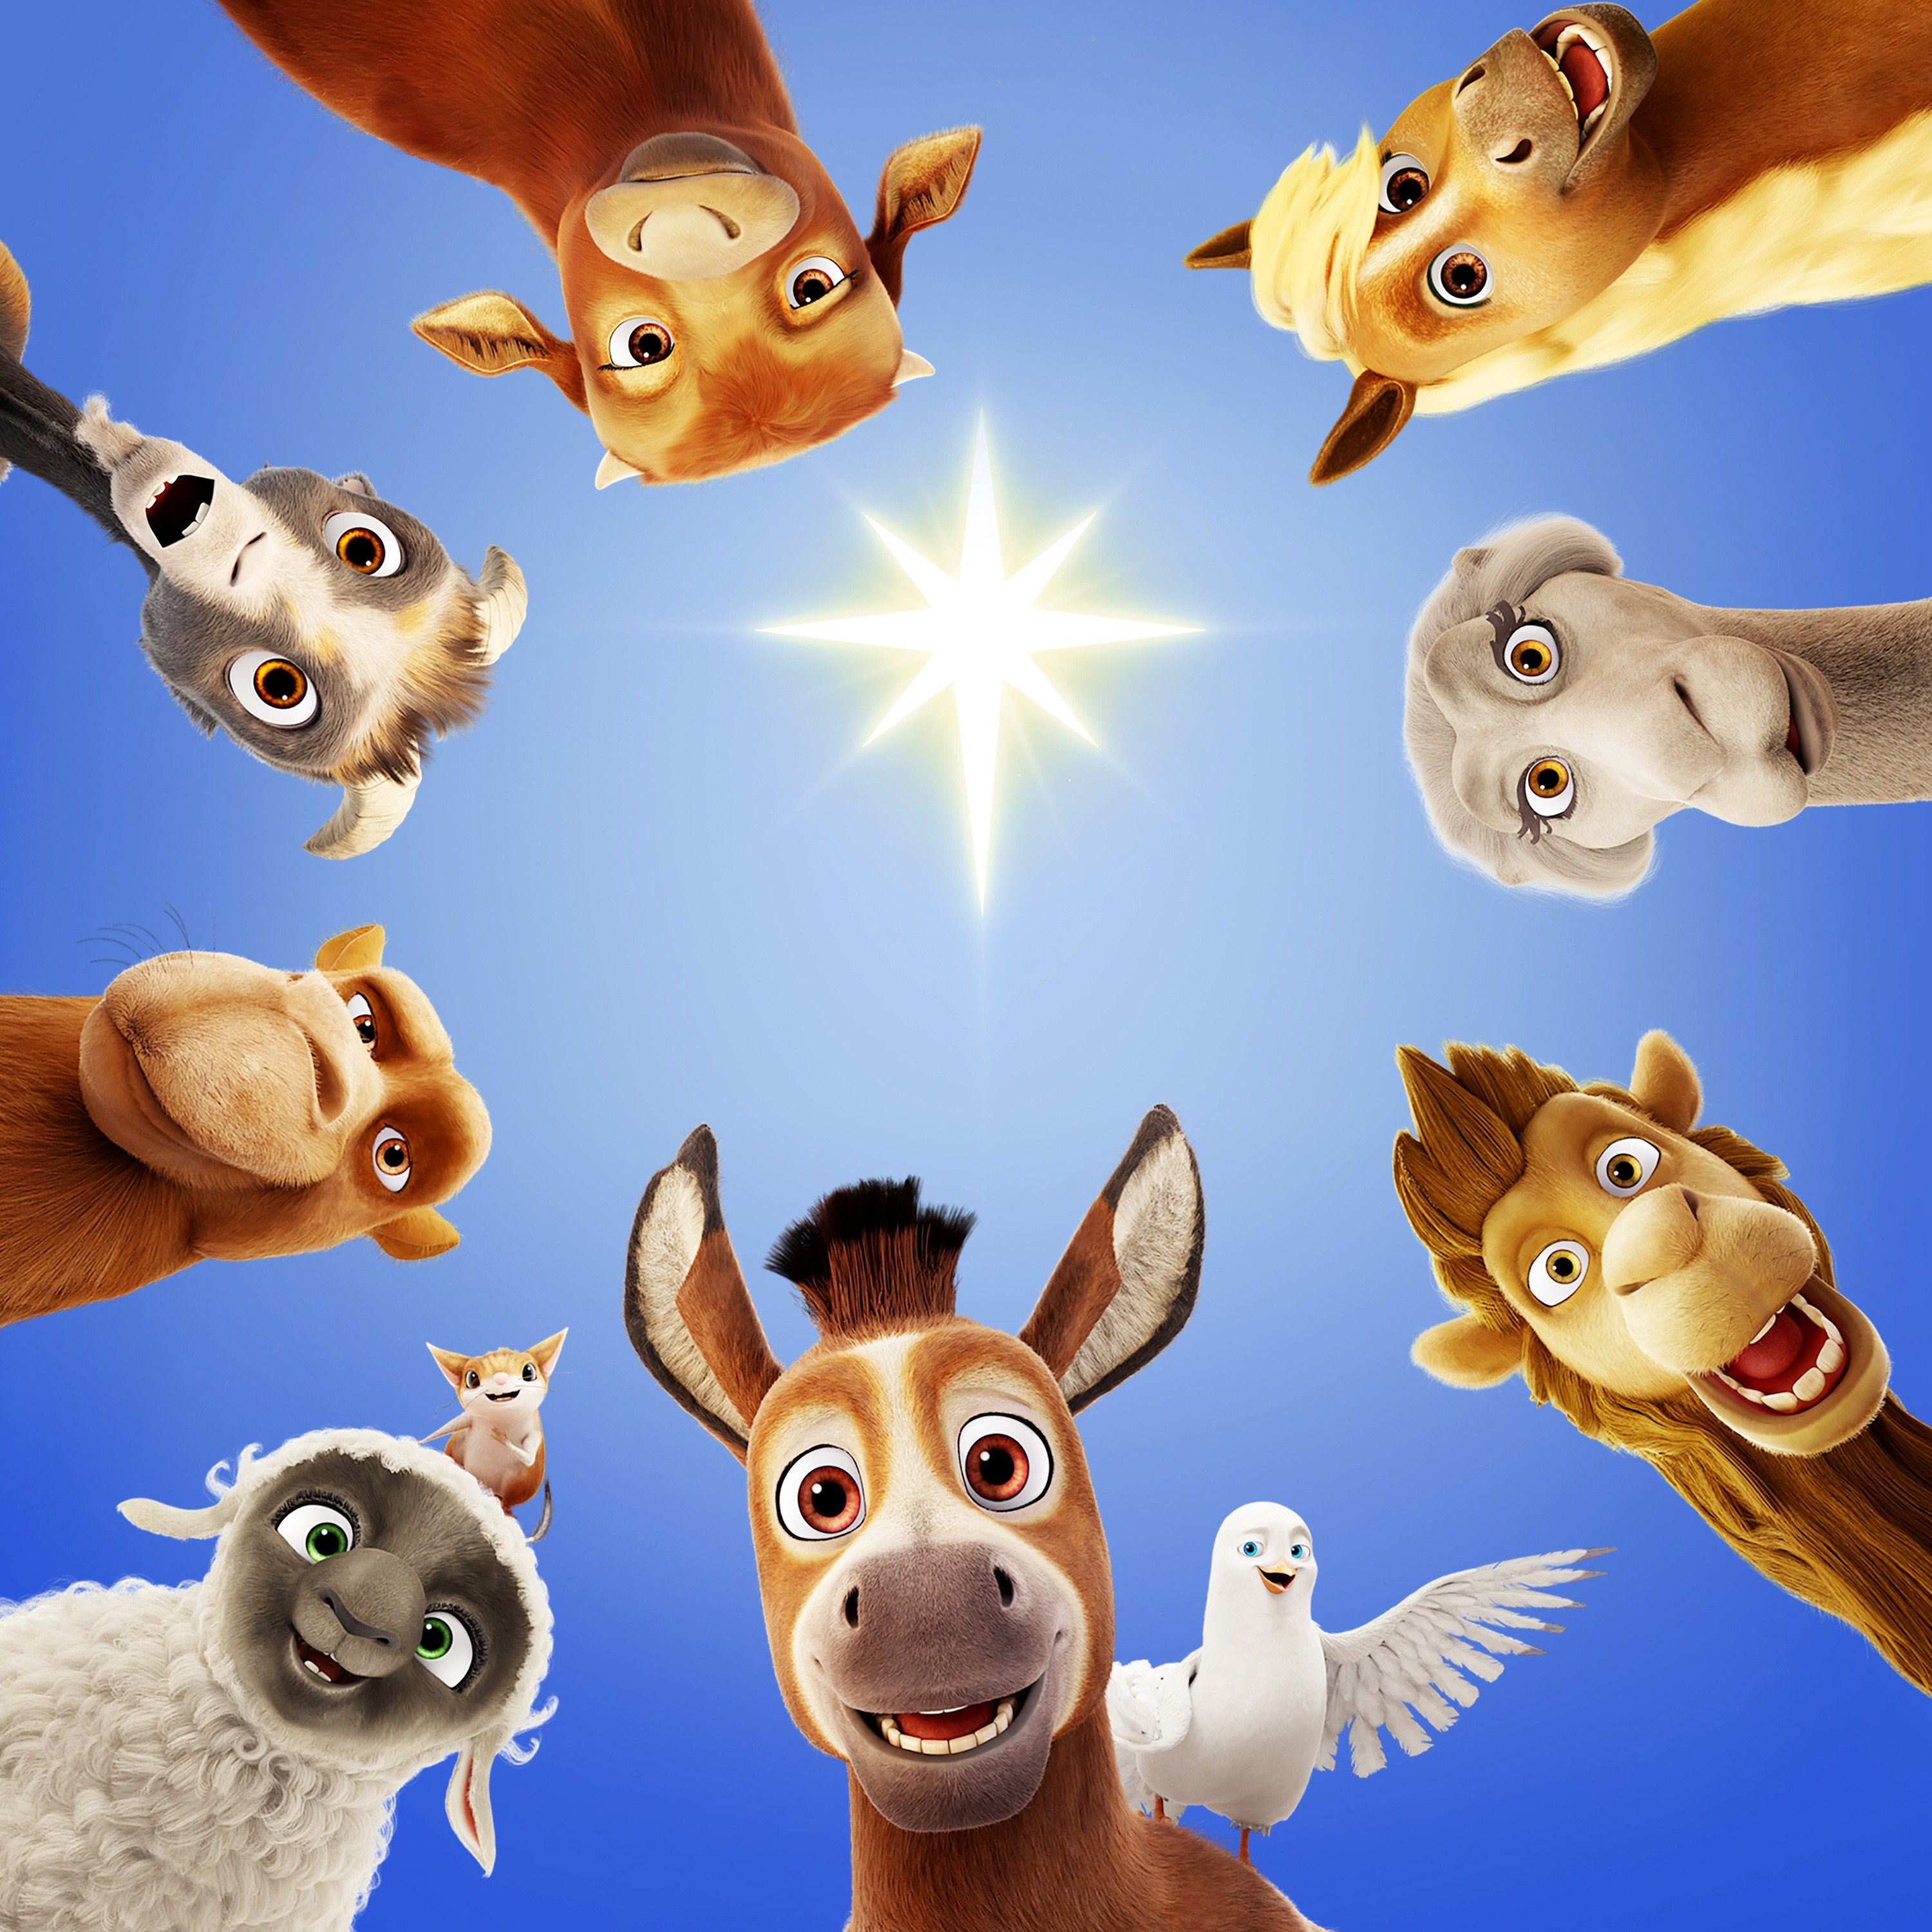 The Best Christian Cartoon Movies, Ranked